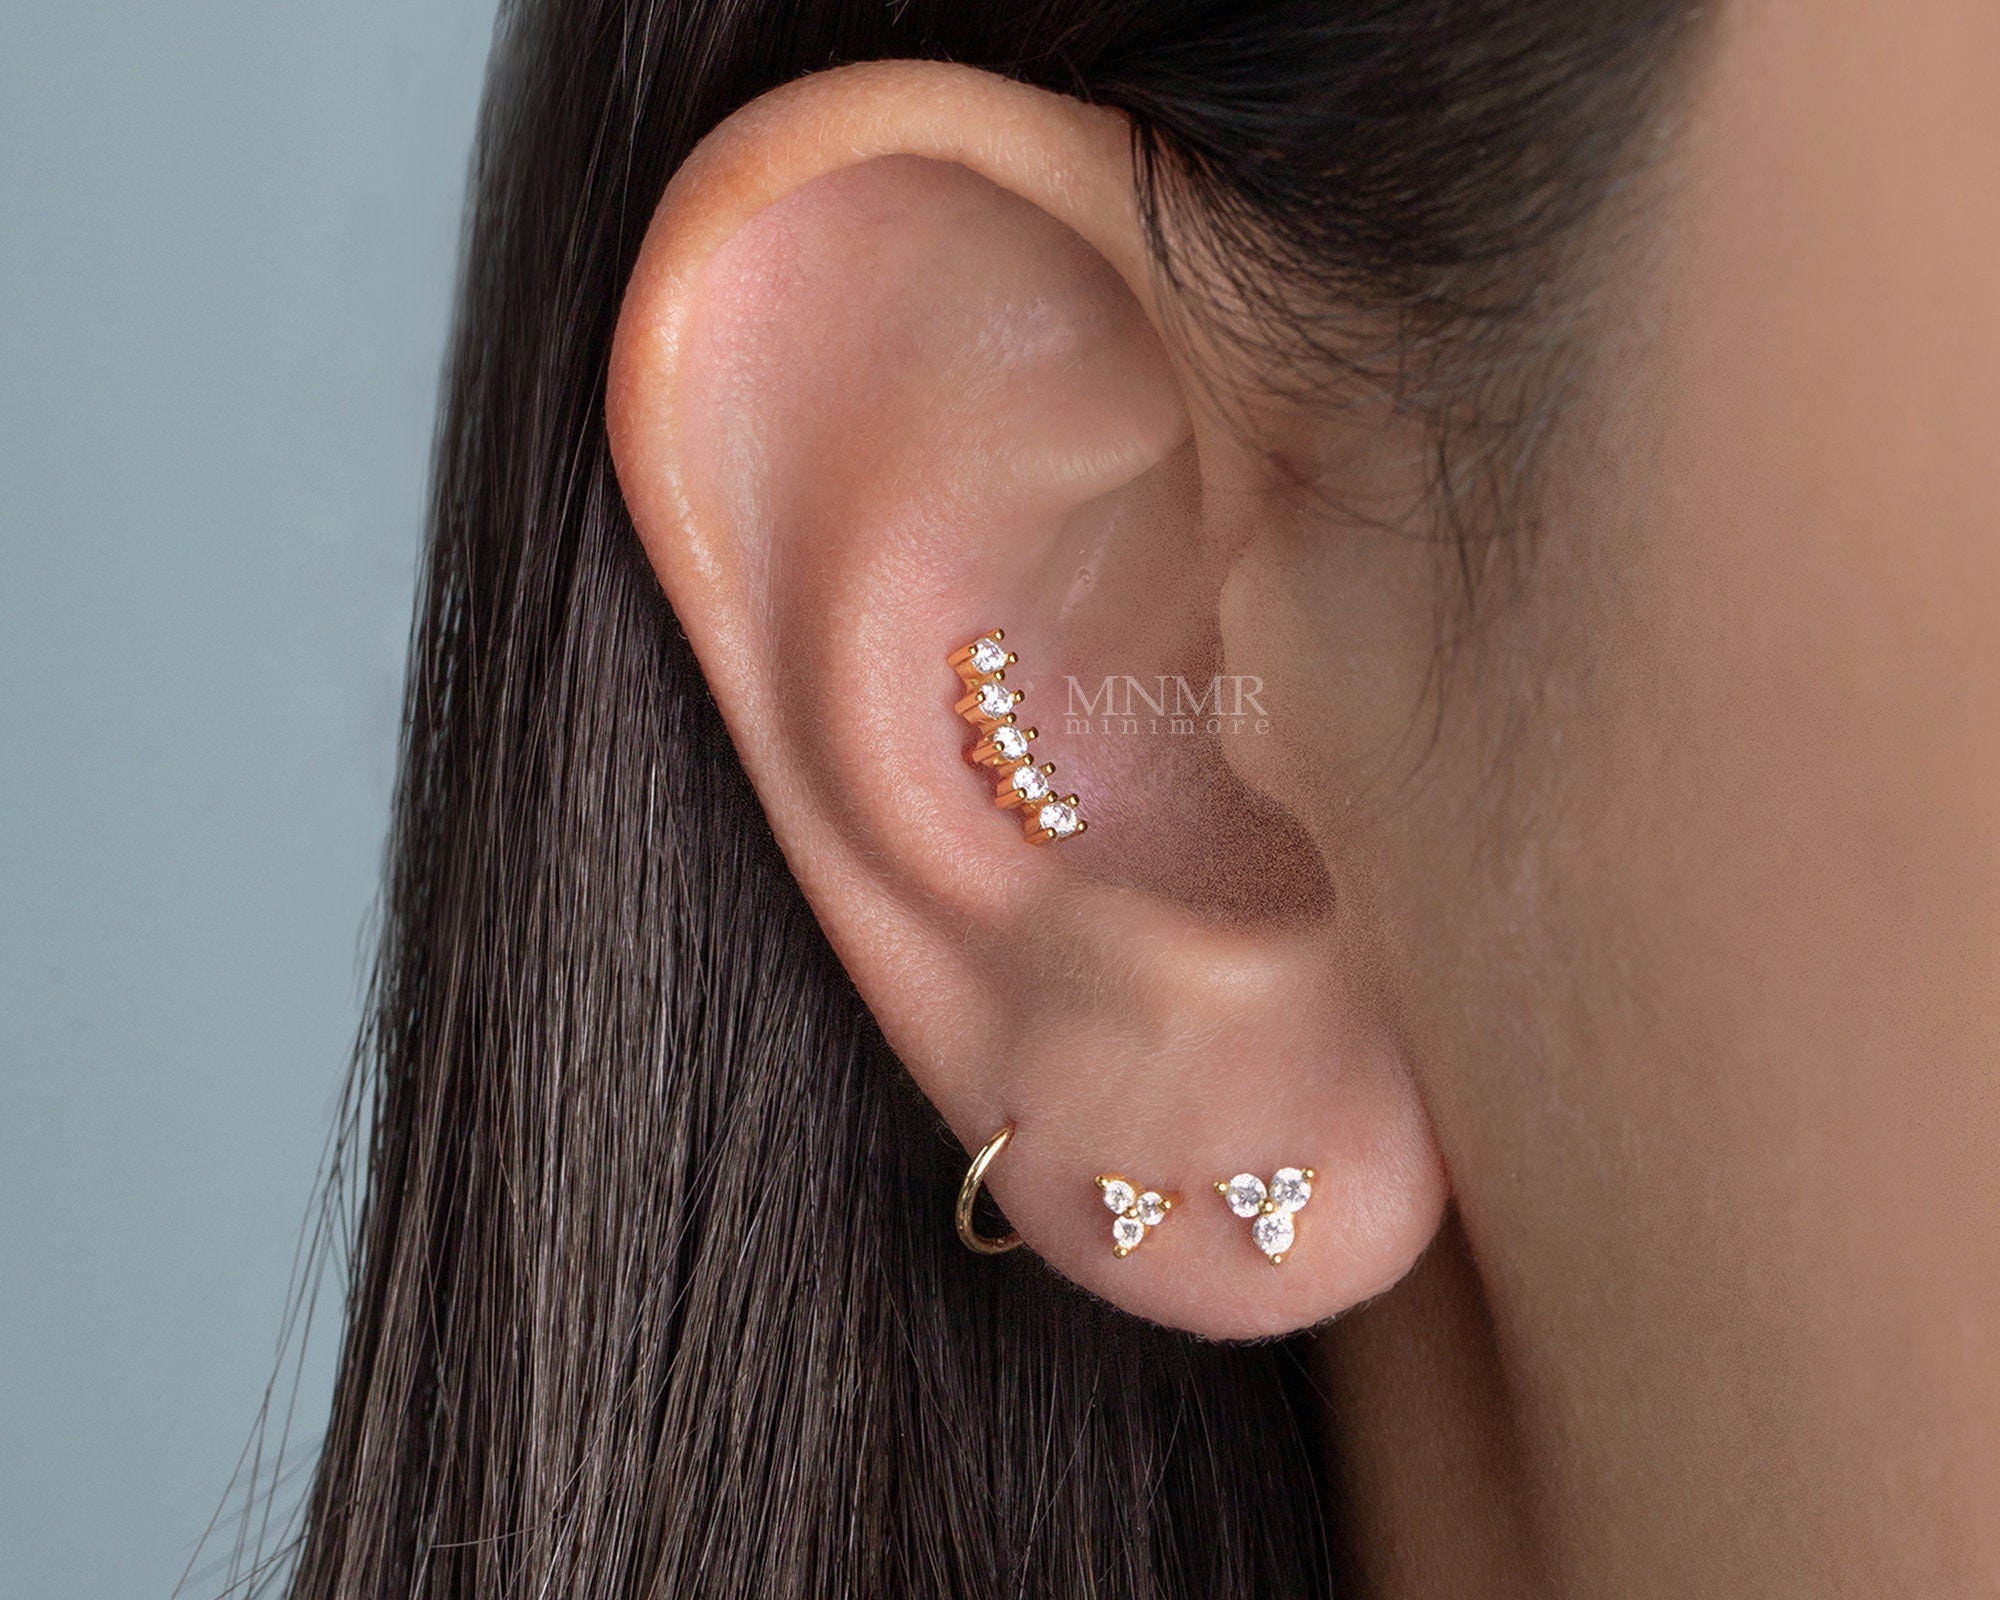 Conch Piercing Jewellery - Page 12 of 44 - Piercer Charlie's Creations